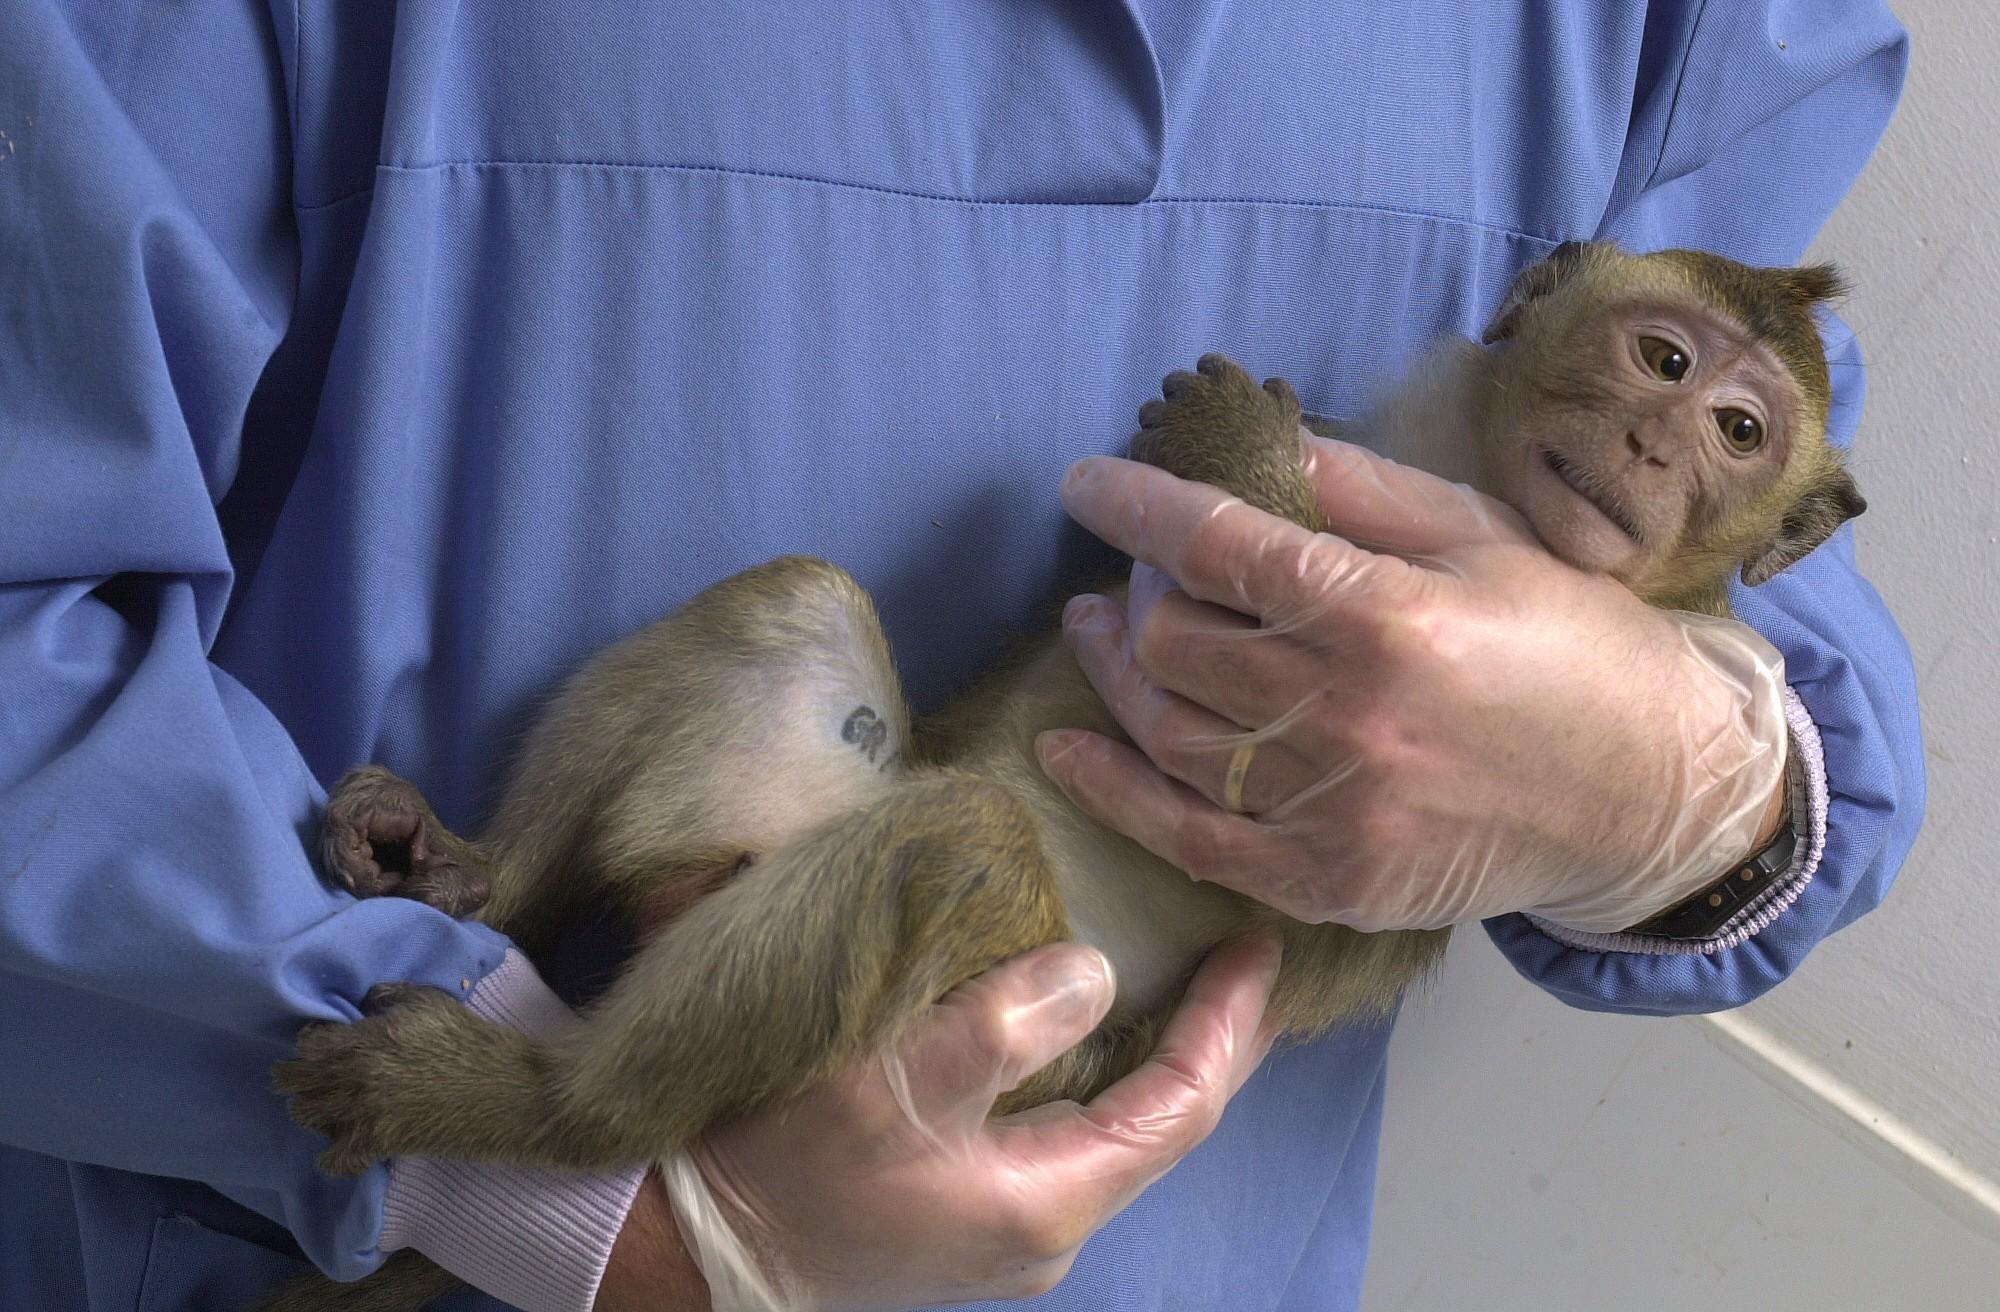 A macaque being cradled by an animal technician. Cradling the animal and talking softly provides some comfort during handling. One arm supports the animal’s weight and the other safely immobilises the animal, holding it close to the body. This macaque is habituated to human contact and remains calm enough to be handled with light gloves. The tense mouth indicates some tension, so handling time is minimised.